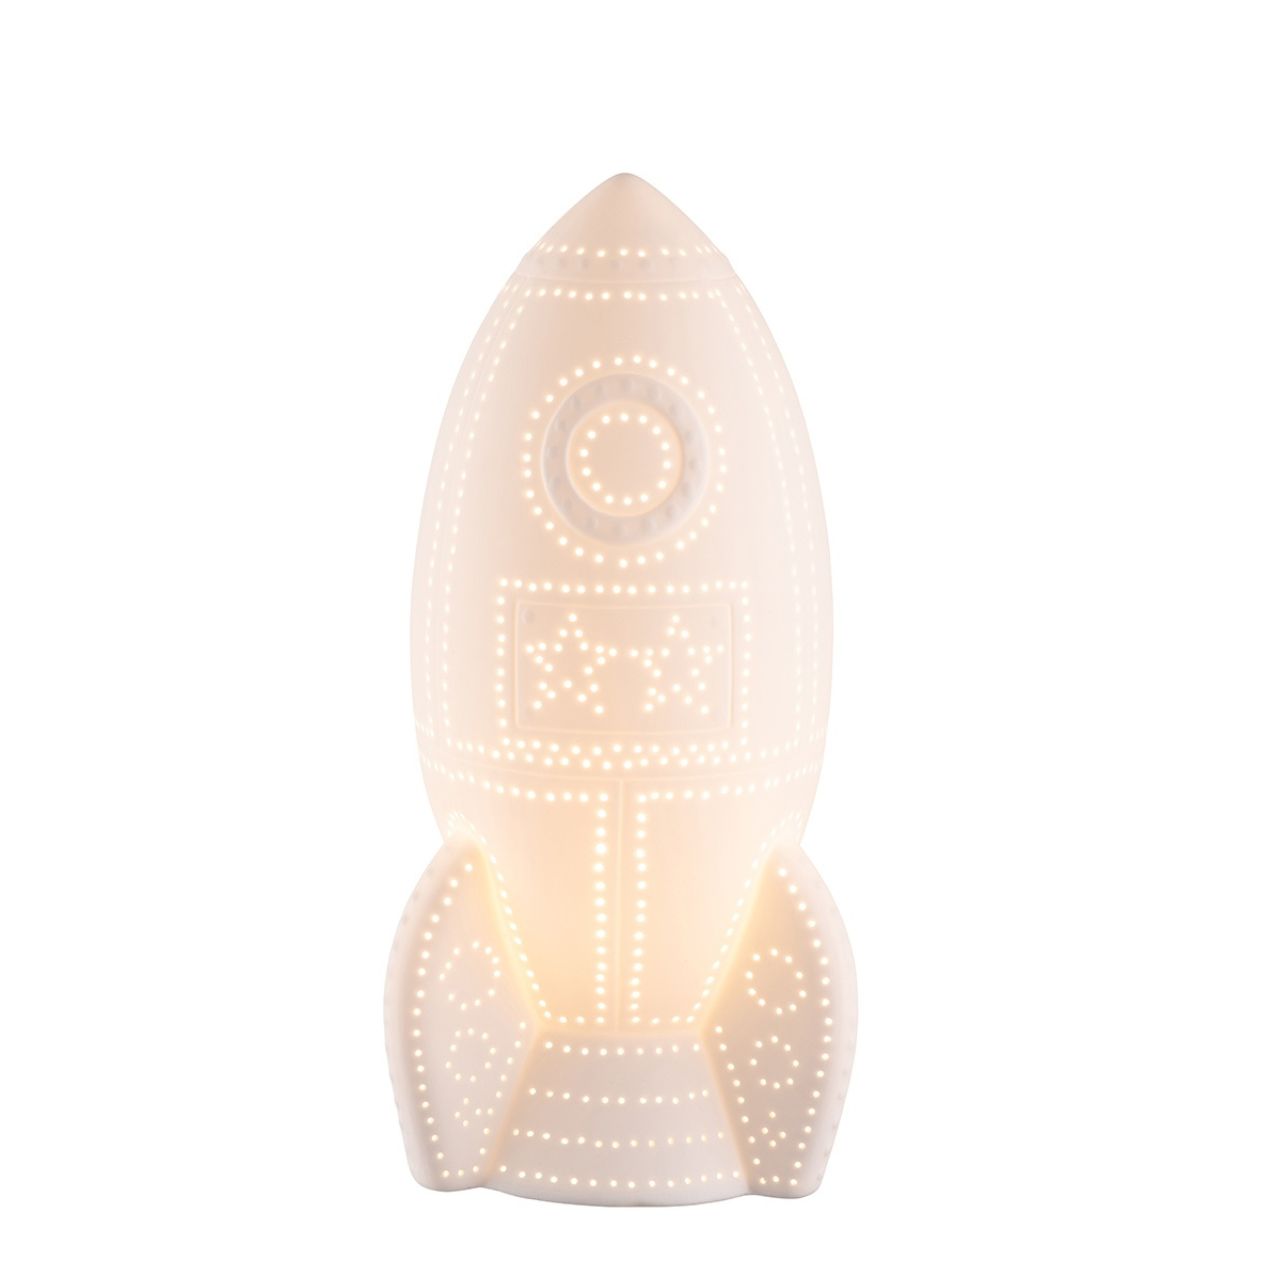 Rocket Luminaire by Belleek Living  The Belleek Living Luminaire lamps emit a soft warm glow highlighting the delicate surface decoration and piercings, creating beautiful mood lighting for your home.